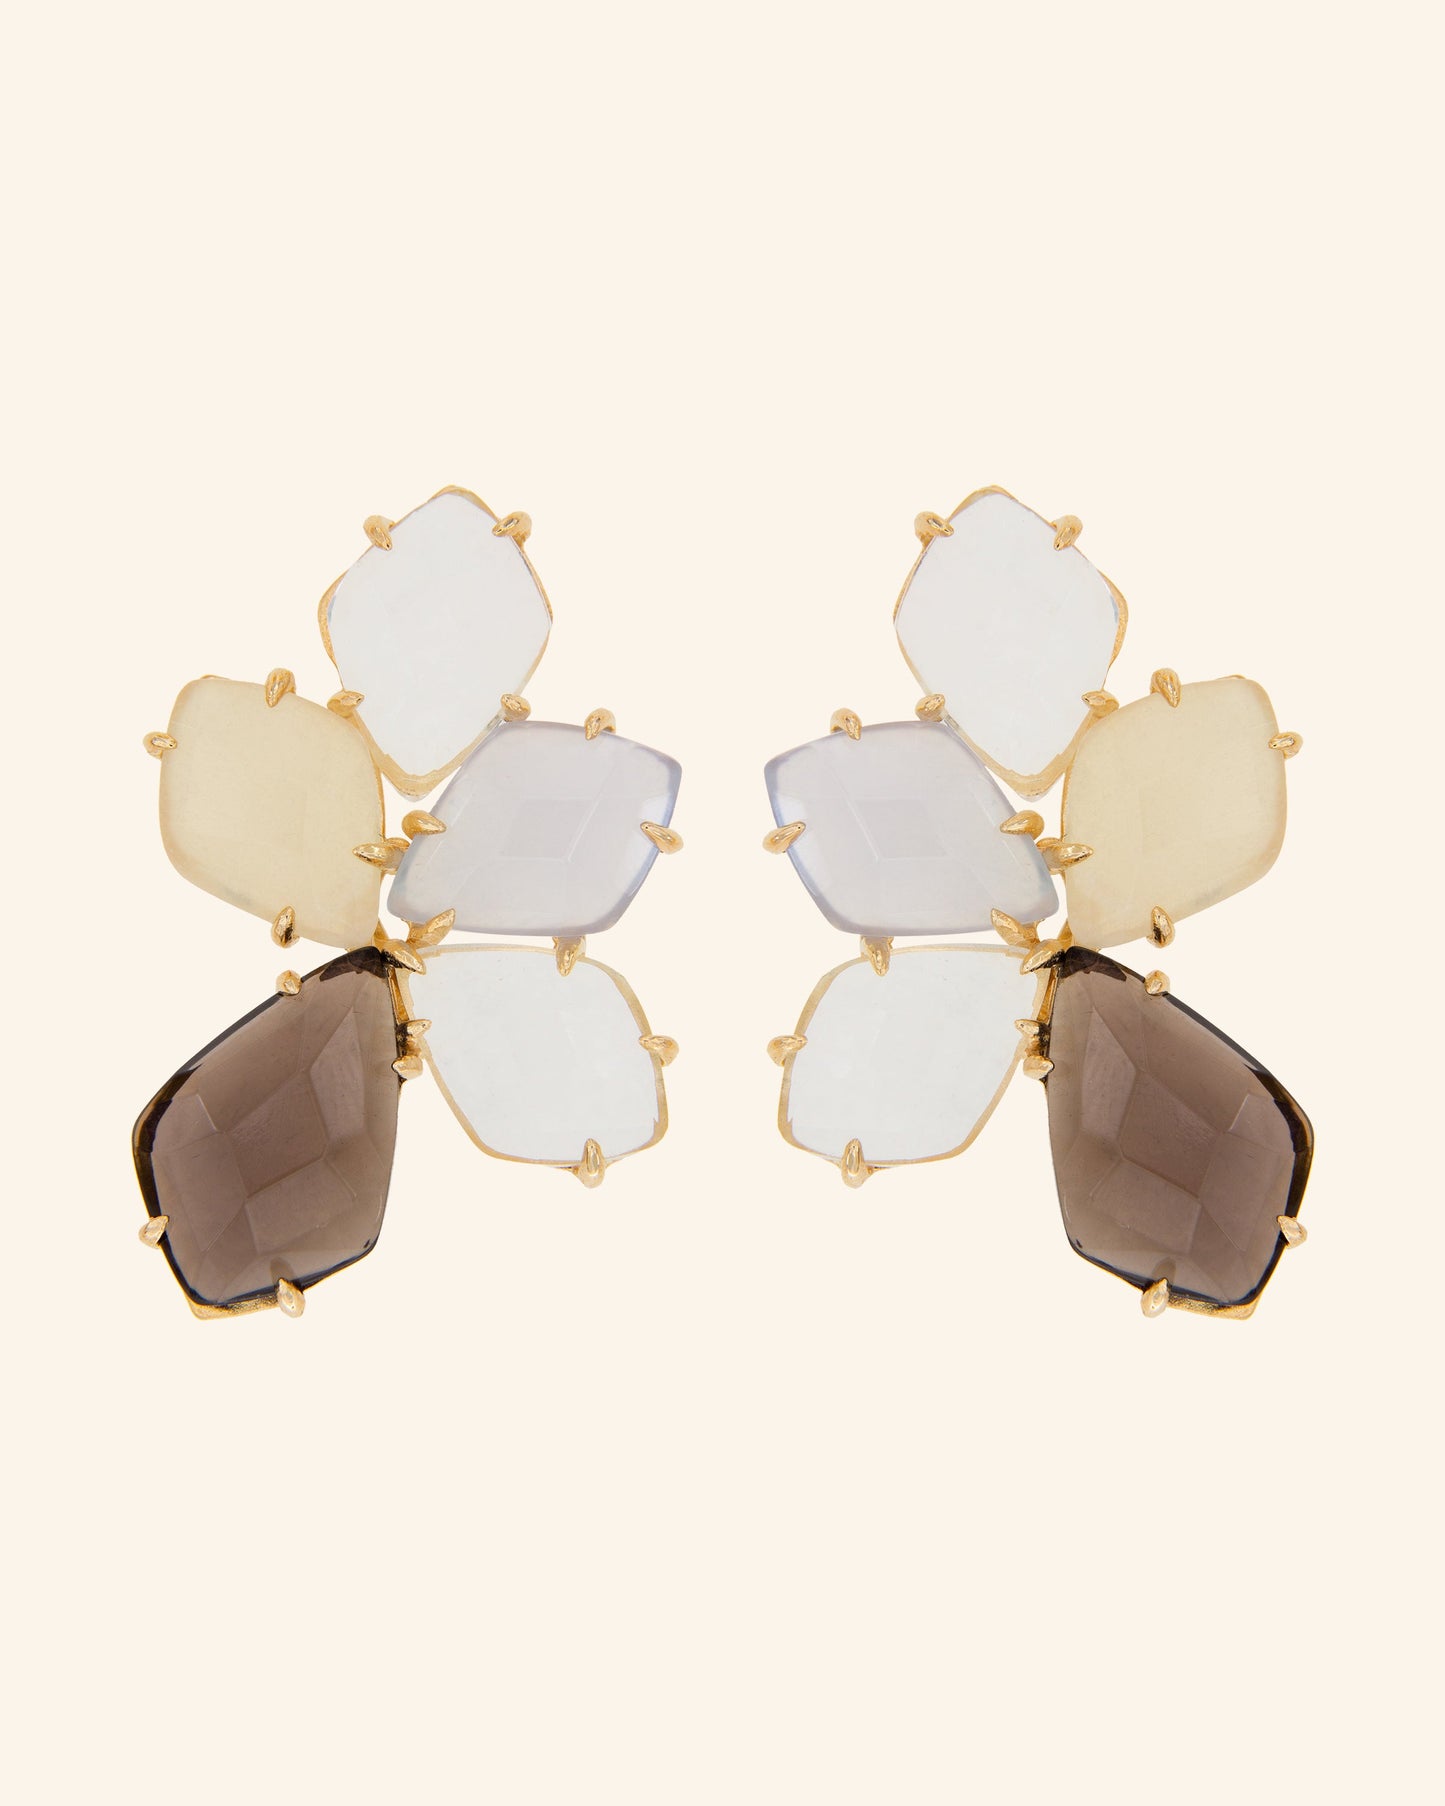 Litos earrings with smoked quartz, chalcedony and colorless quartz